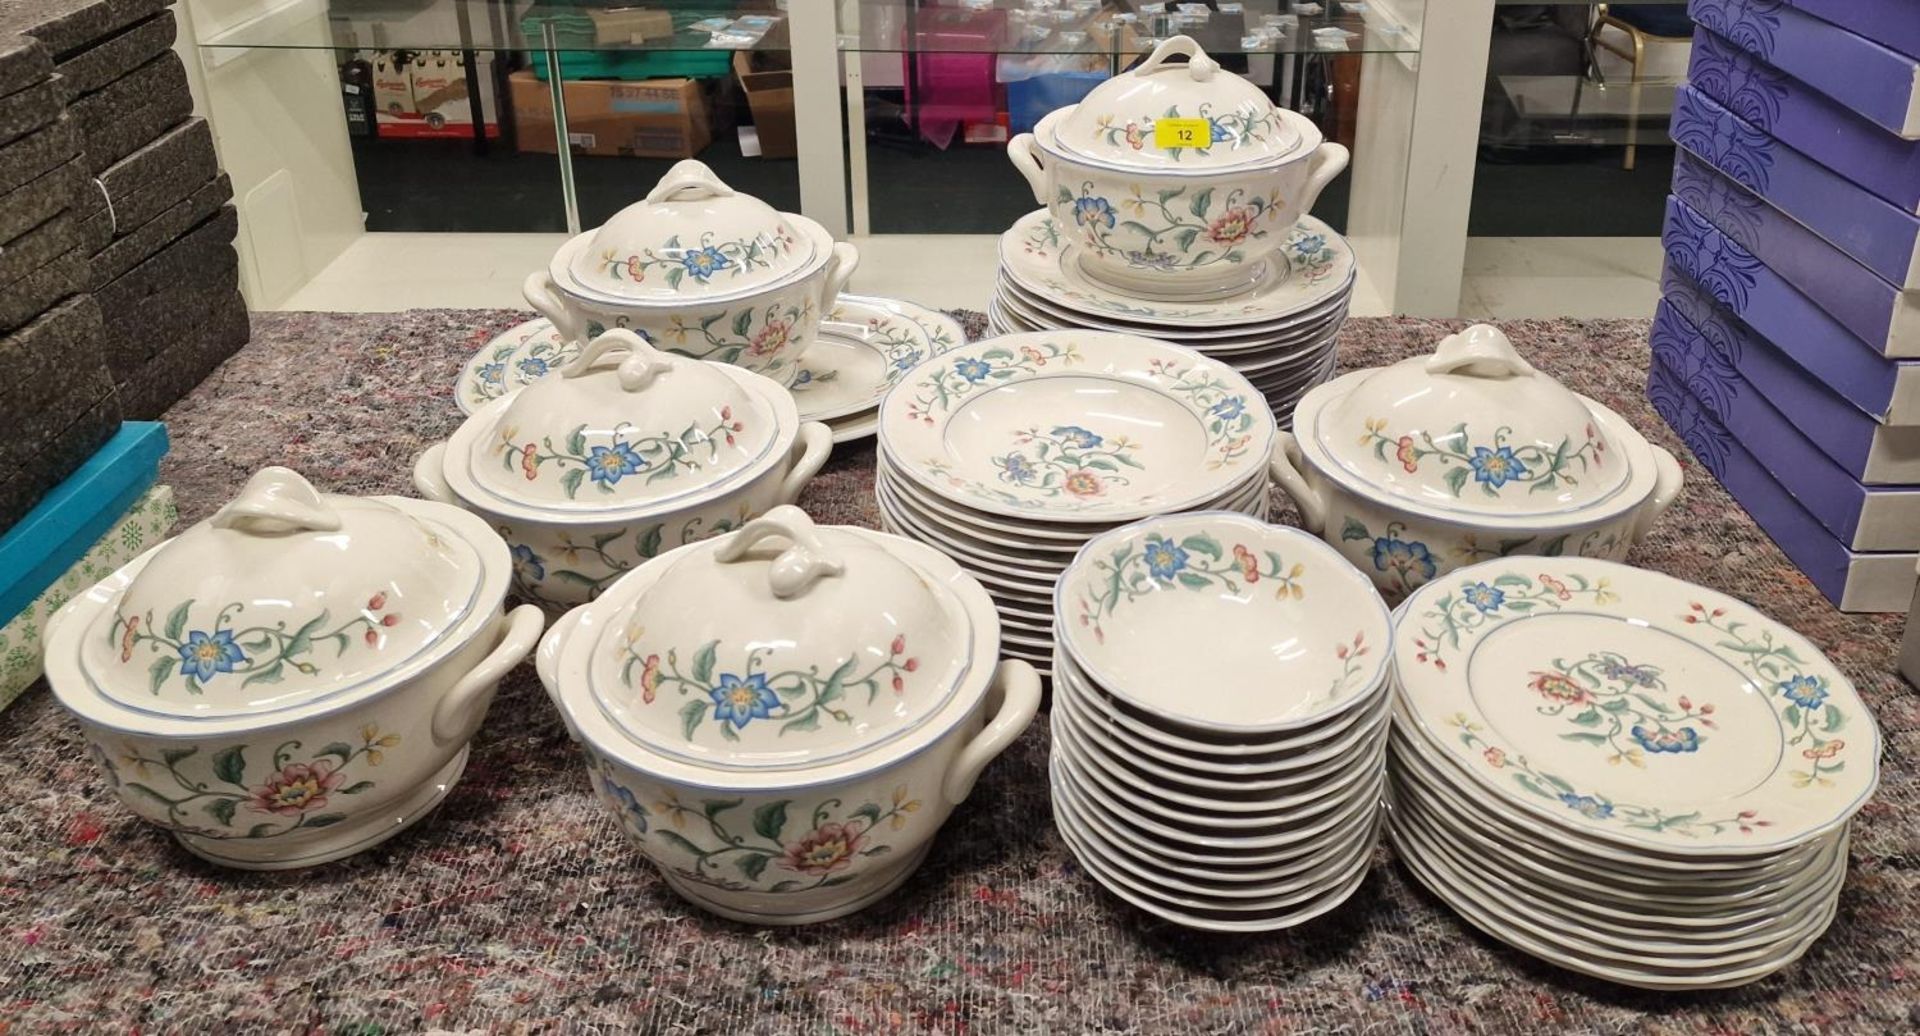 Villeroy & Boch "Delia" large porcelain dinner service for 12 place settings to include 6 Tureens,